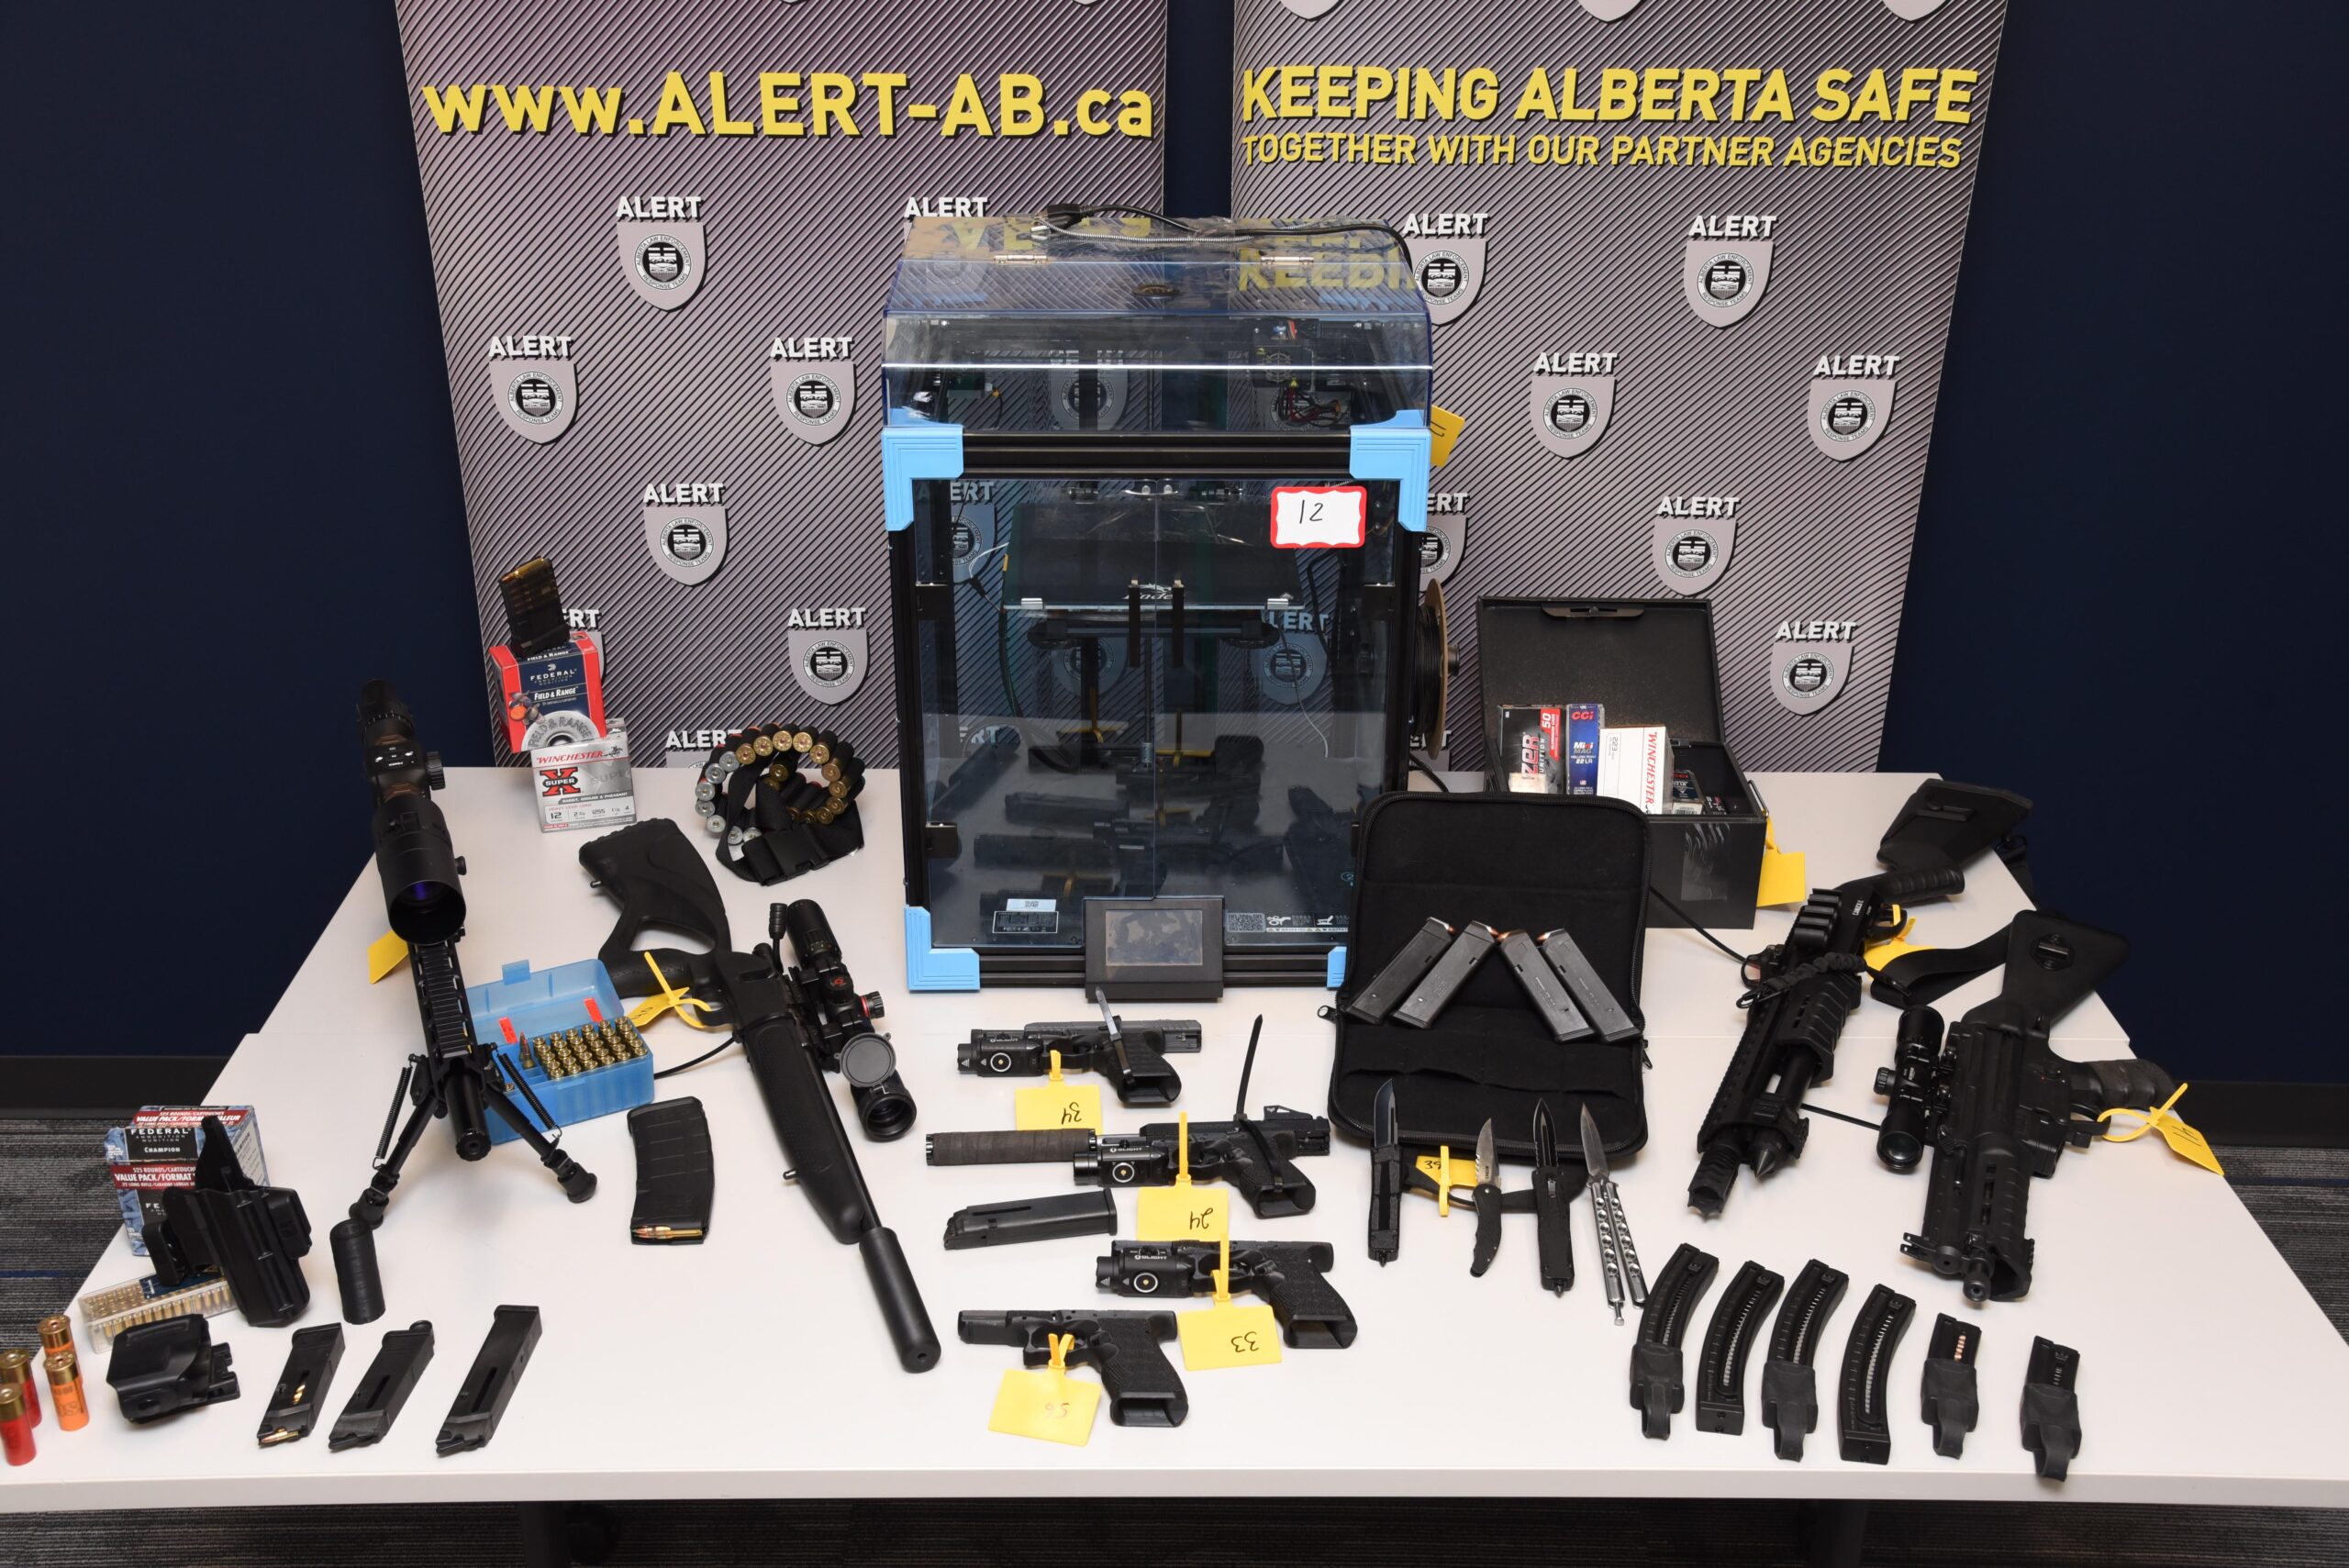 3D-printed firearms, handguns, and rifles seized from Brooks, Alberta.